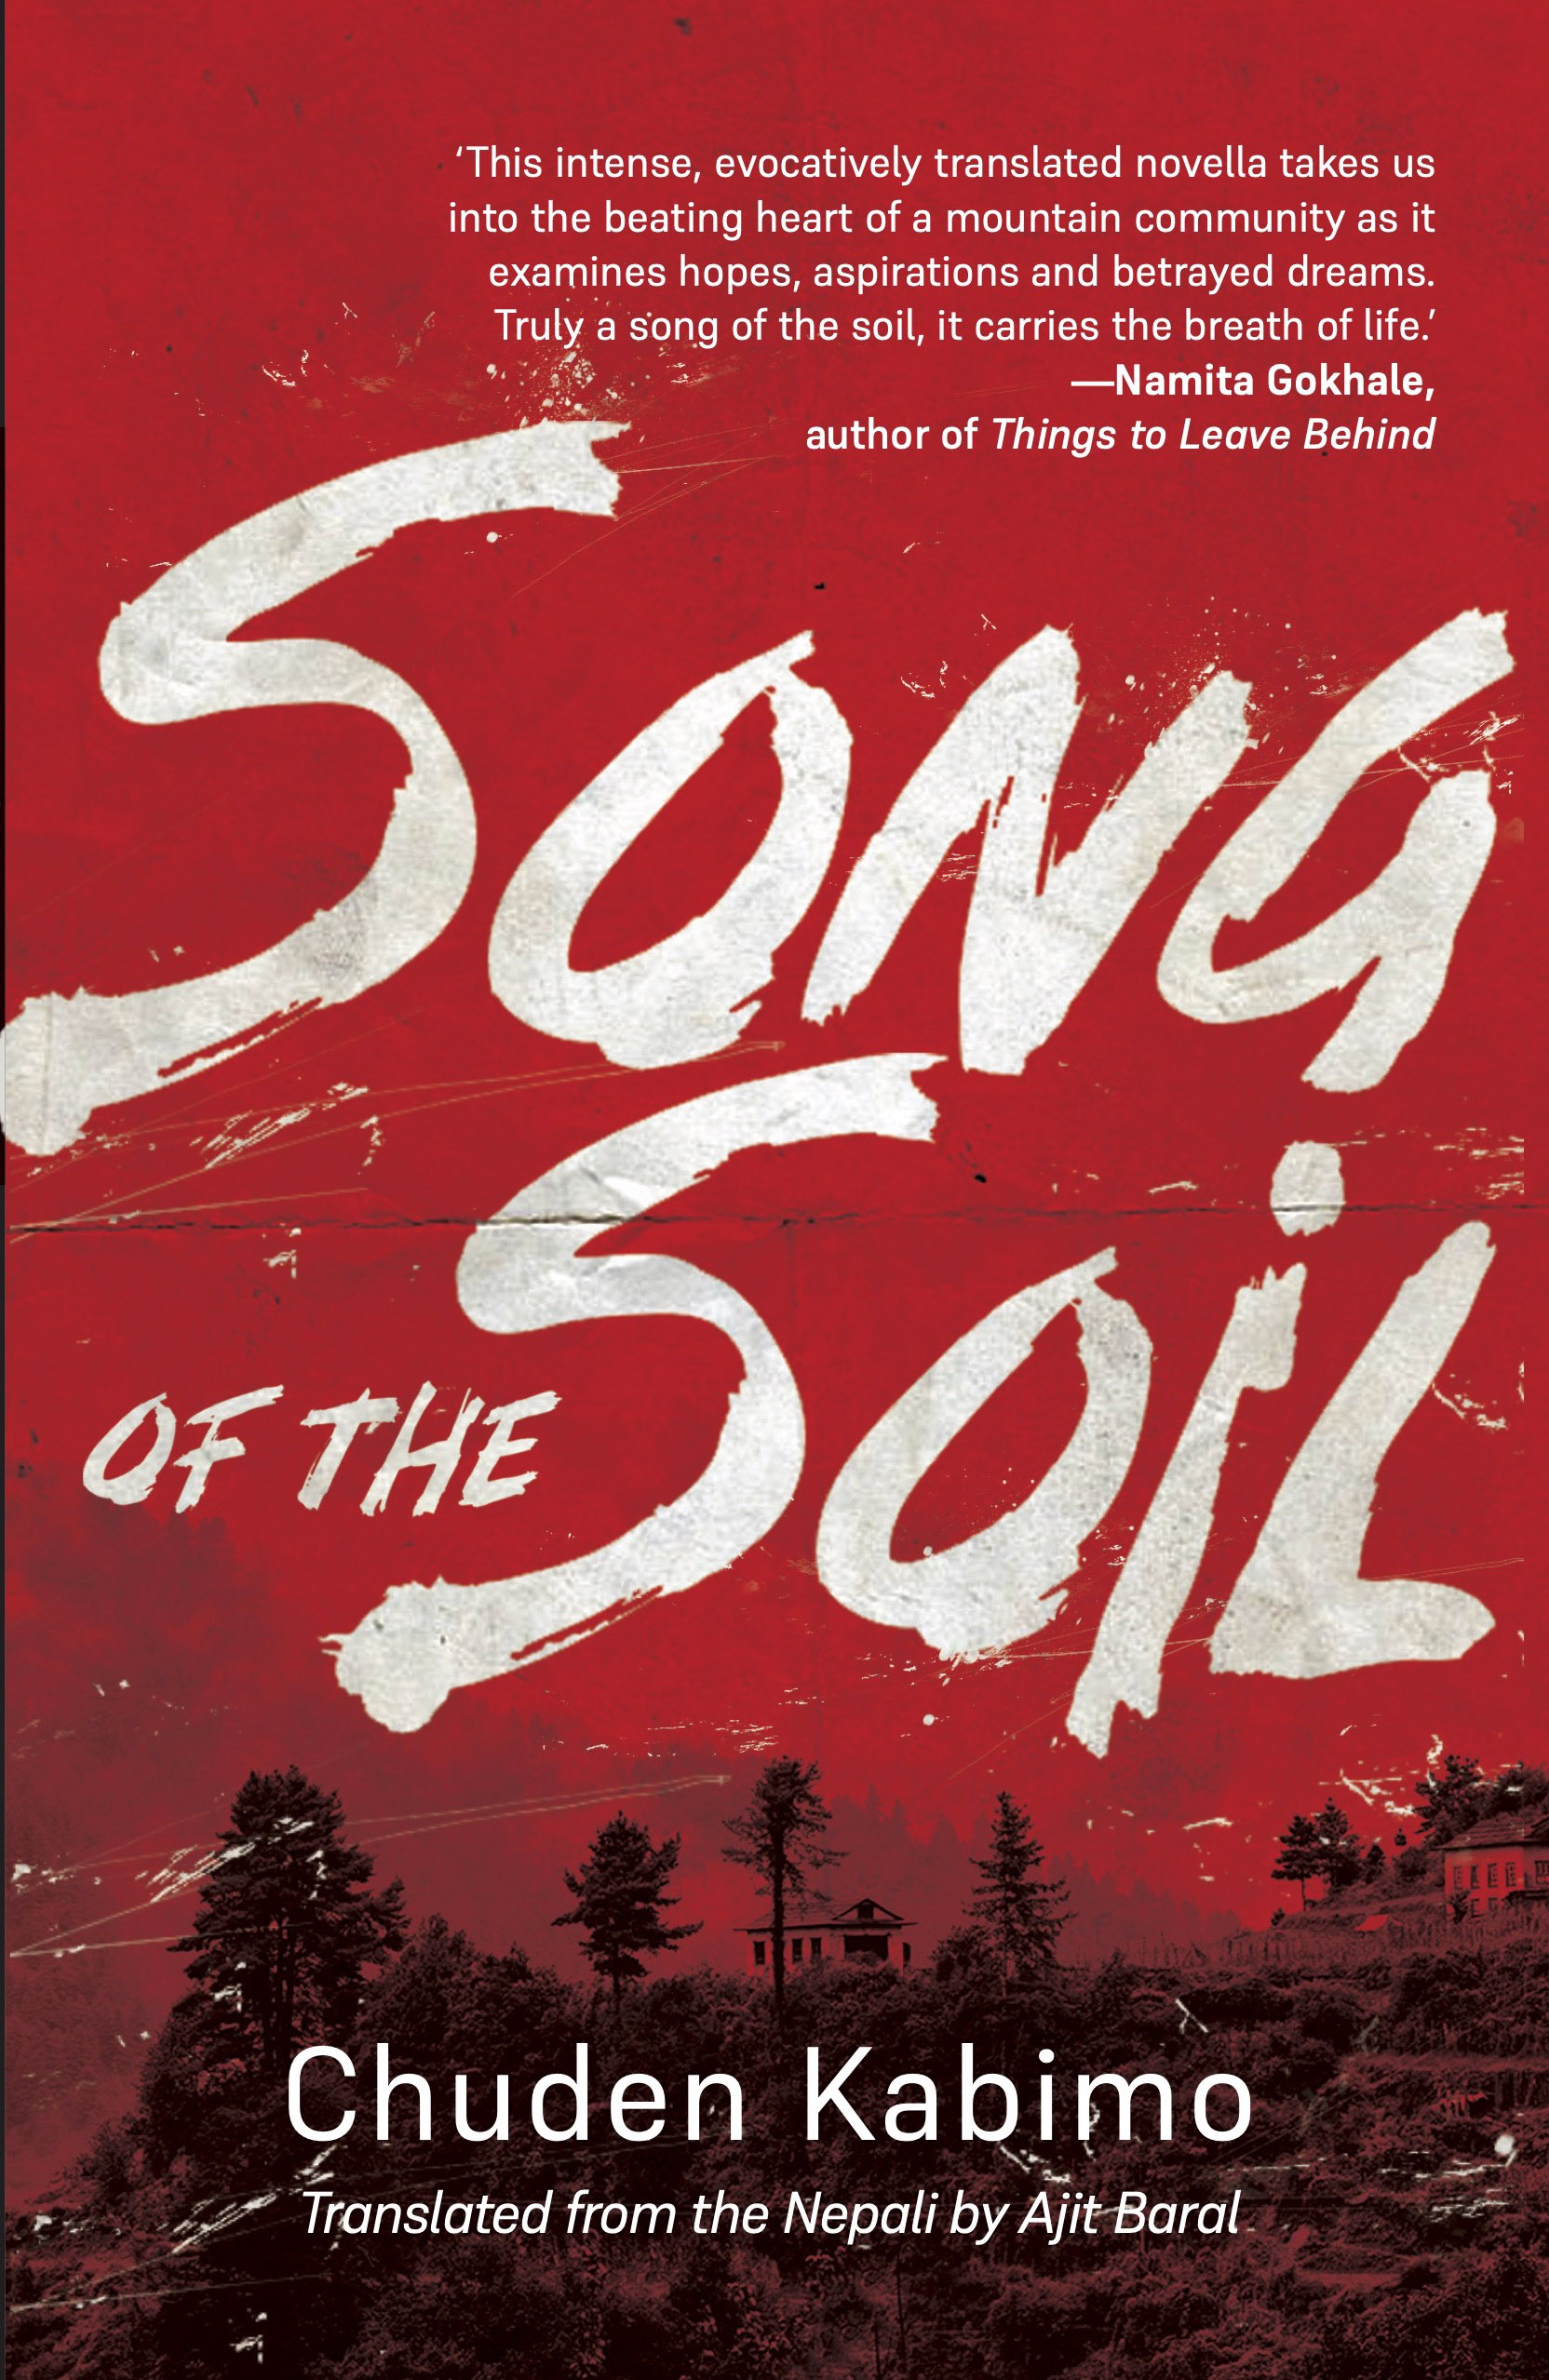 Song of the Soil